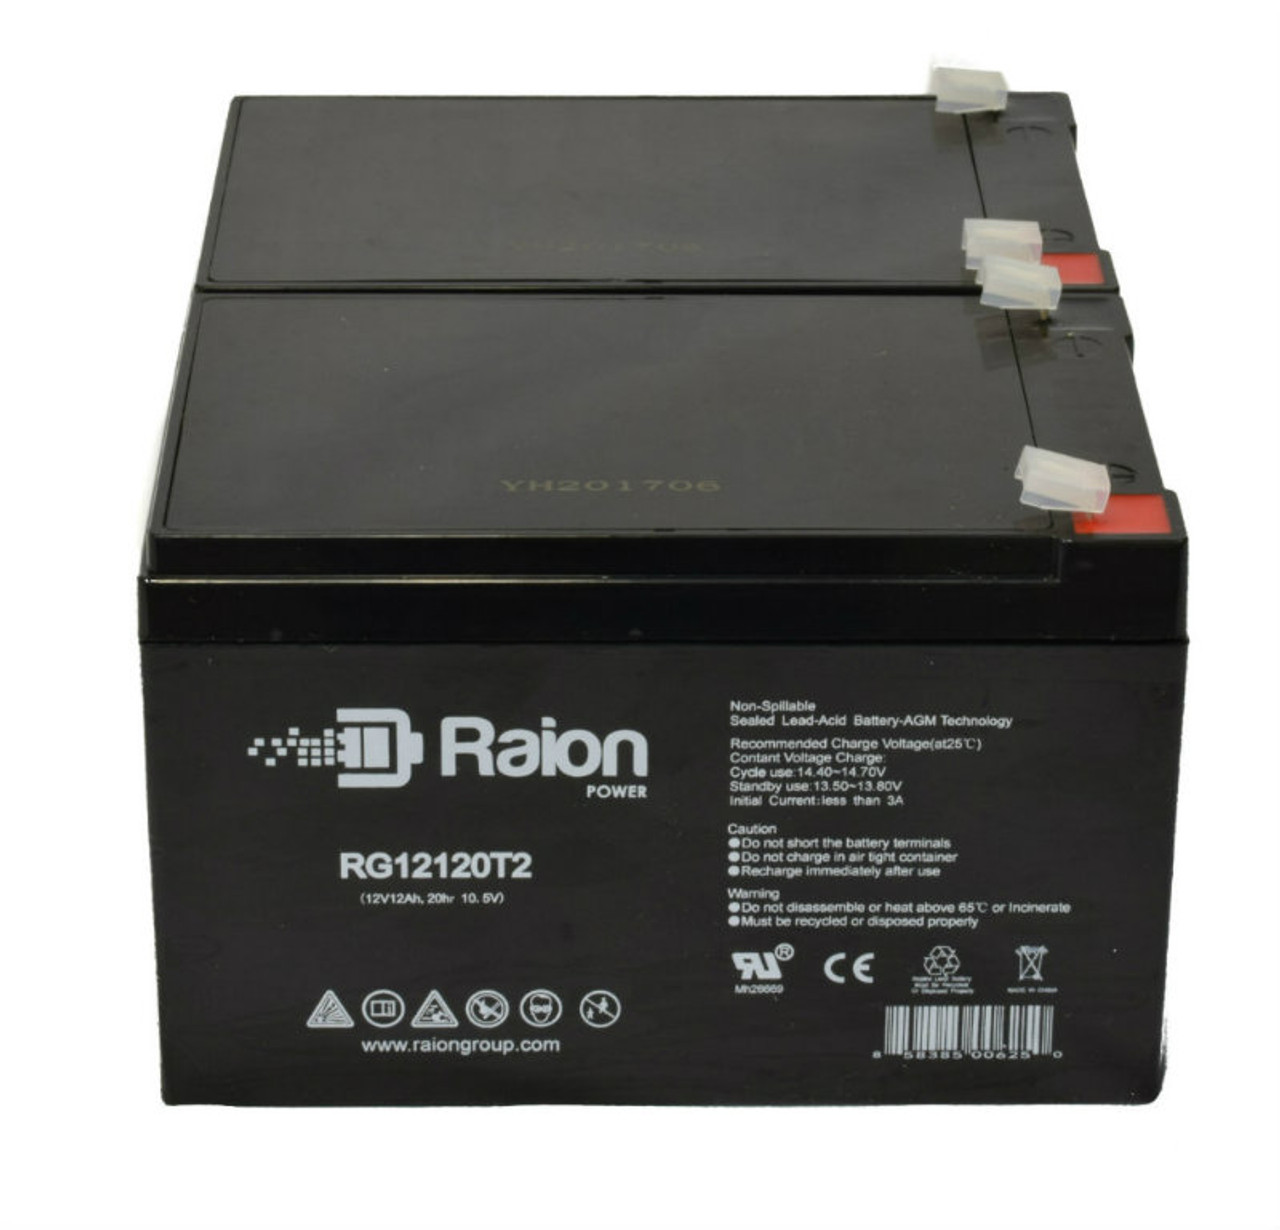 Raion Power 12V 12Ah Non-Spillable Compatible Replacement Battery for Alarmtec BP12-12 - (2 Pack)